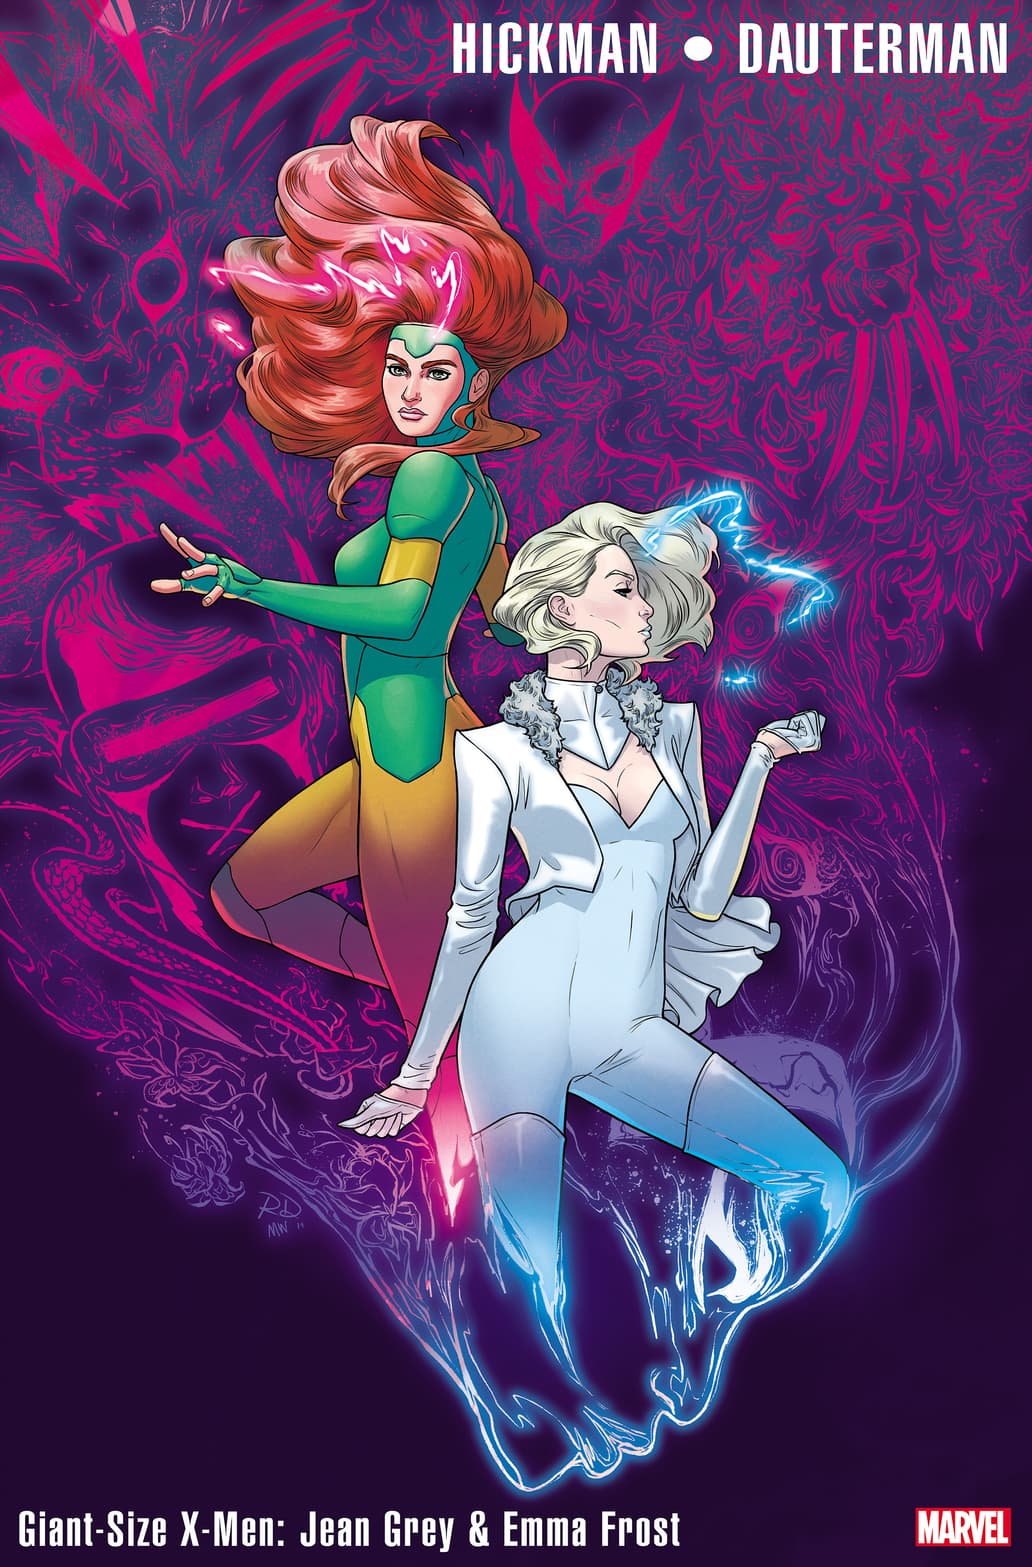 GIANT-SIZE X-MEN: JEAN GREY AND EMMA FROST #1 cover by Russell Dauterman and Matt Wilson